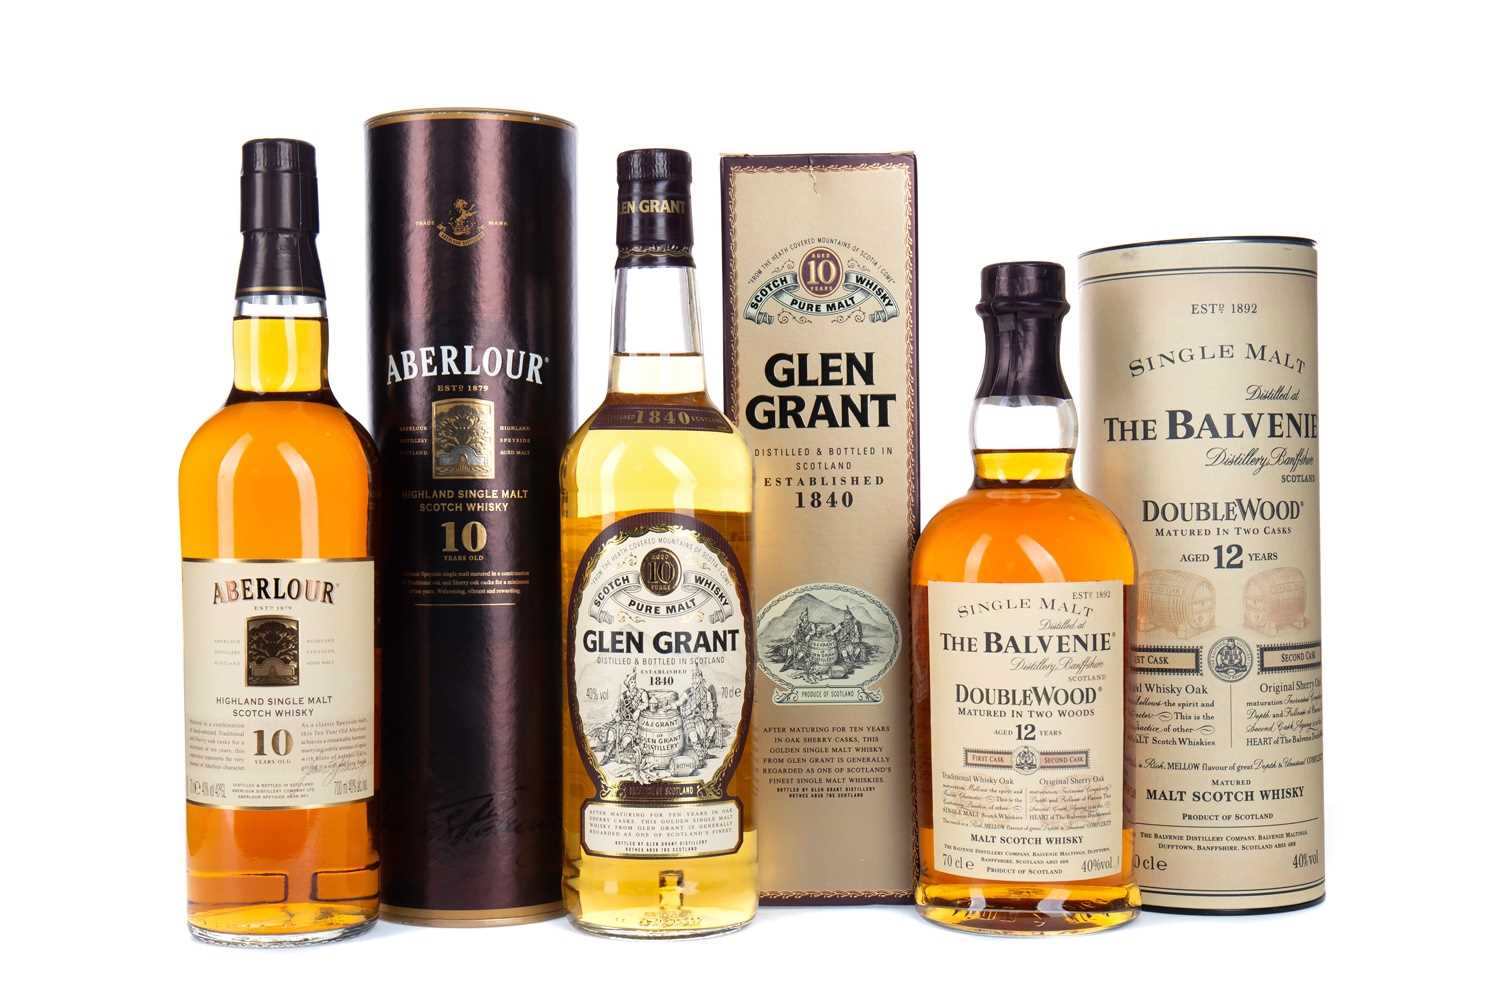 Lot 45 - ABERLOUR 10 YEARS OLD, GLEN GRANT AGED 10 YEARS AND BALVENIE DOUBLEWOOD AGED 12 YEARS